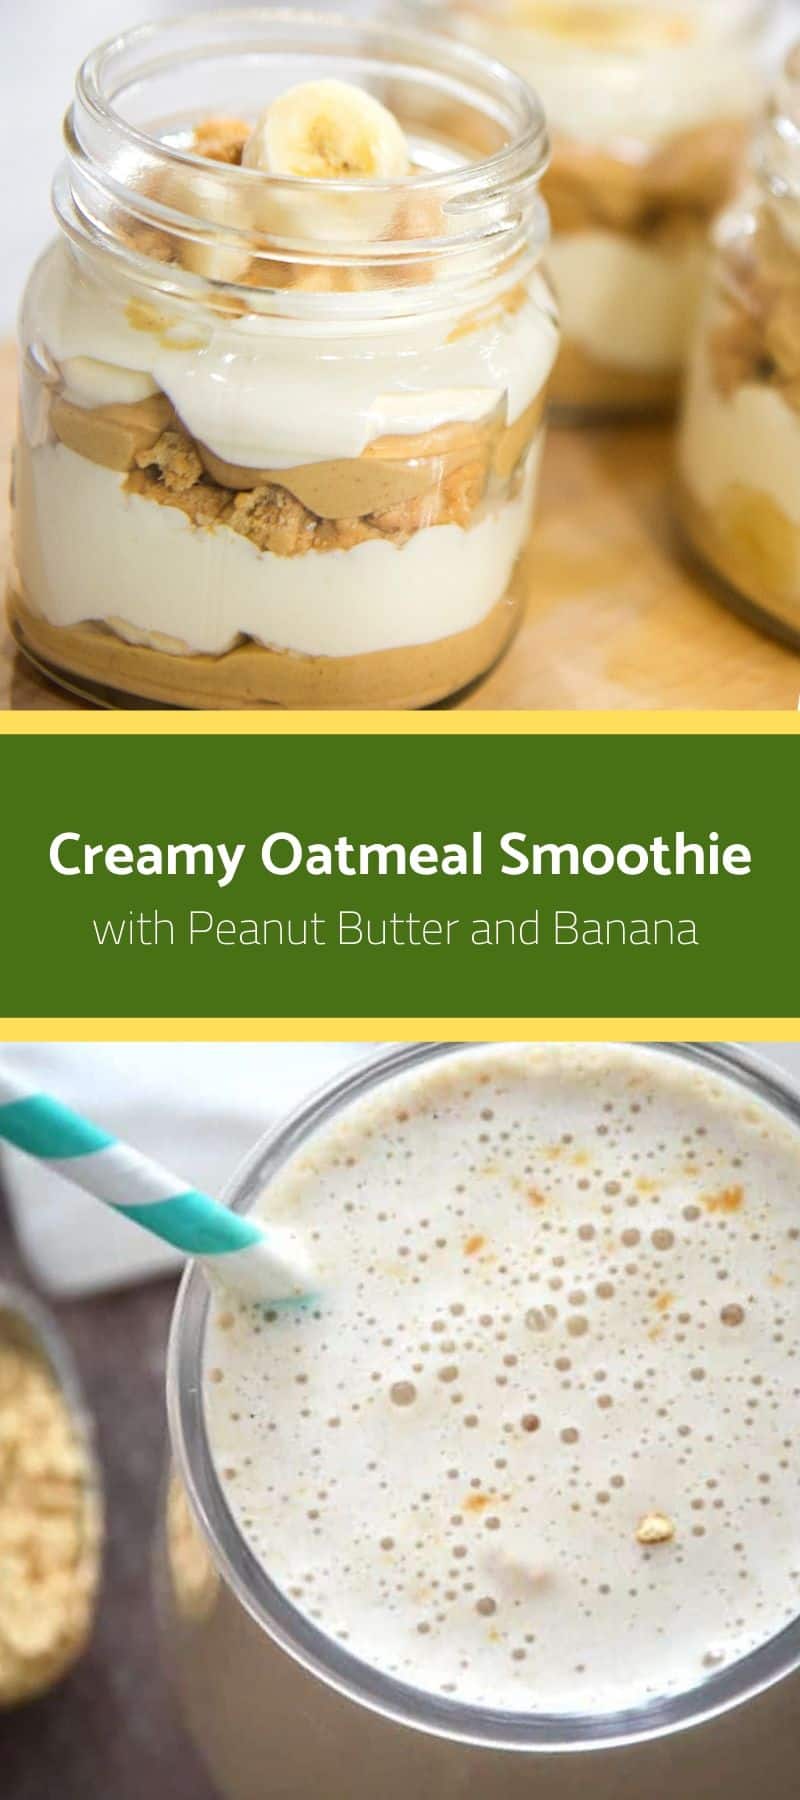 Creamy Oatmeal Smoothie with Peanut Butter and Banana 3